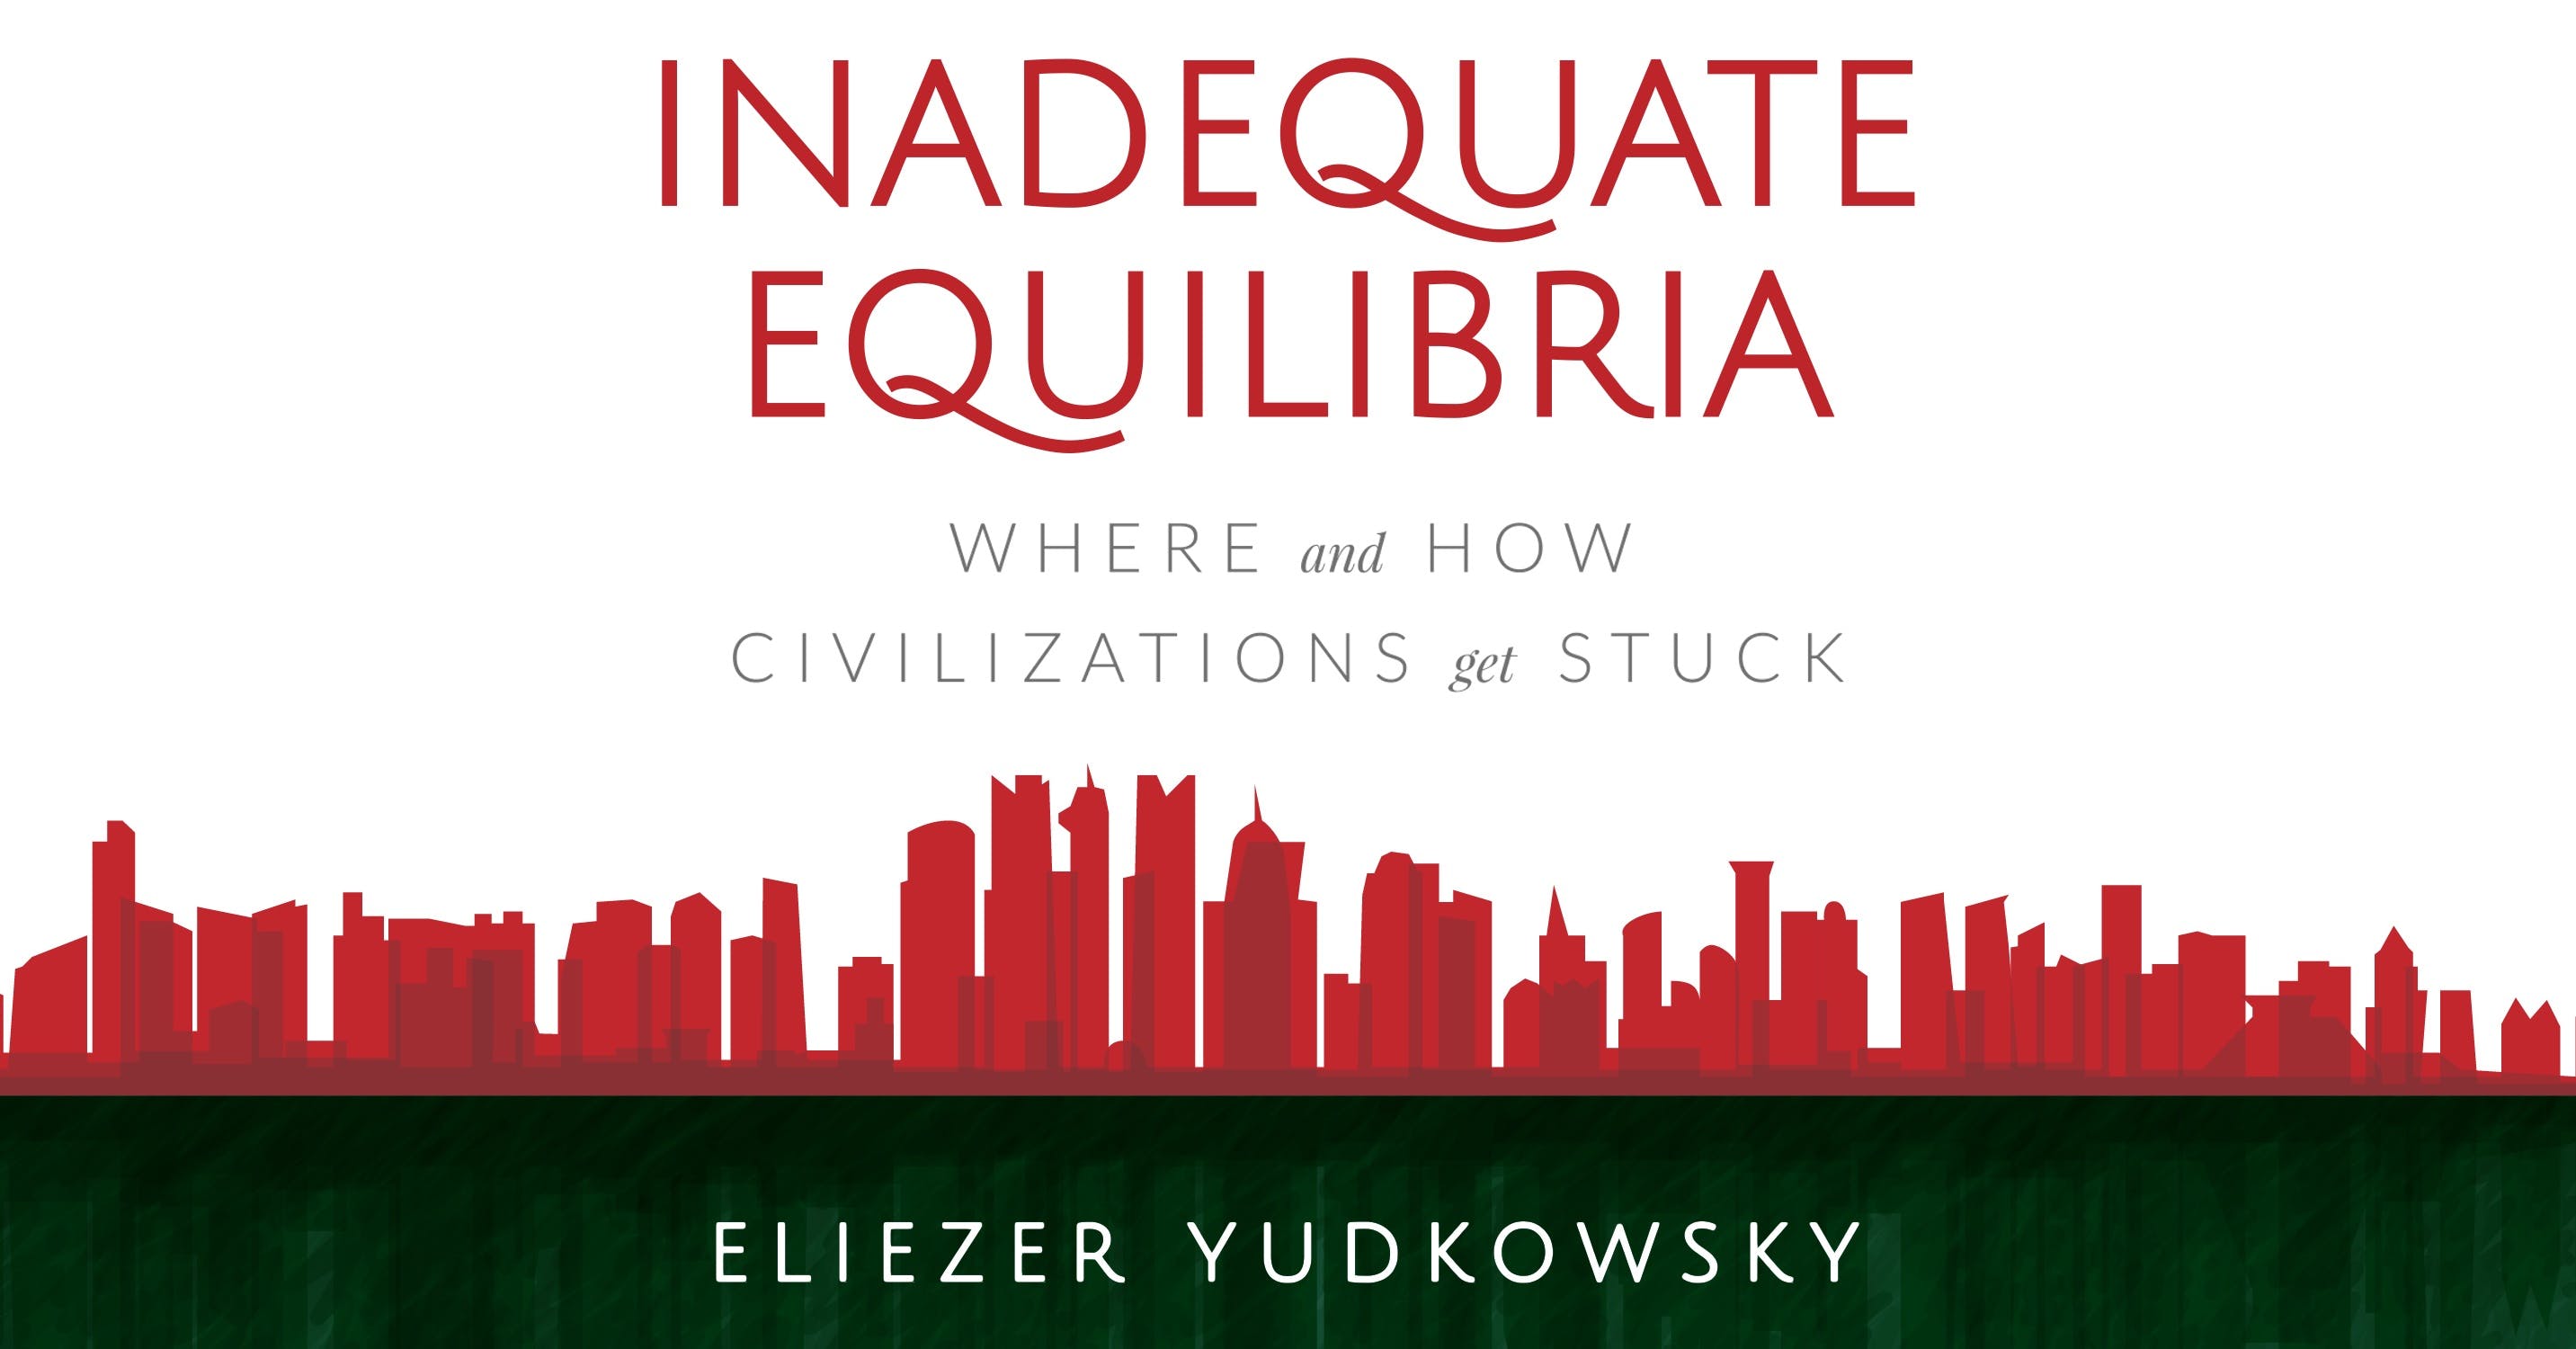 Inadequate Equilibria: Where and How Civilizations Get Stuck, by Eliezer Yudkowsky media 2